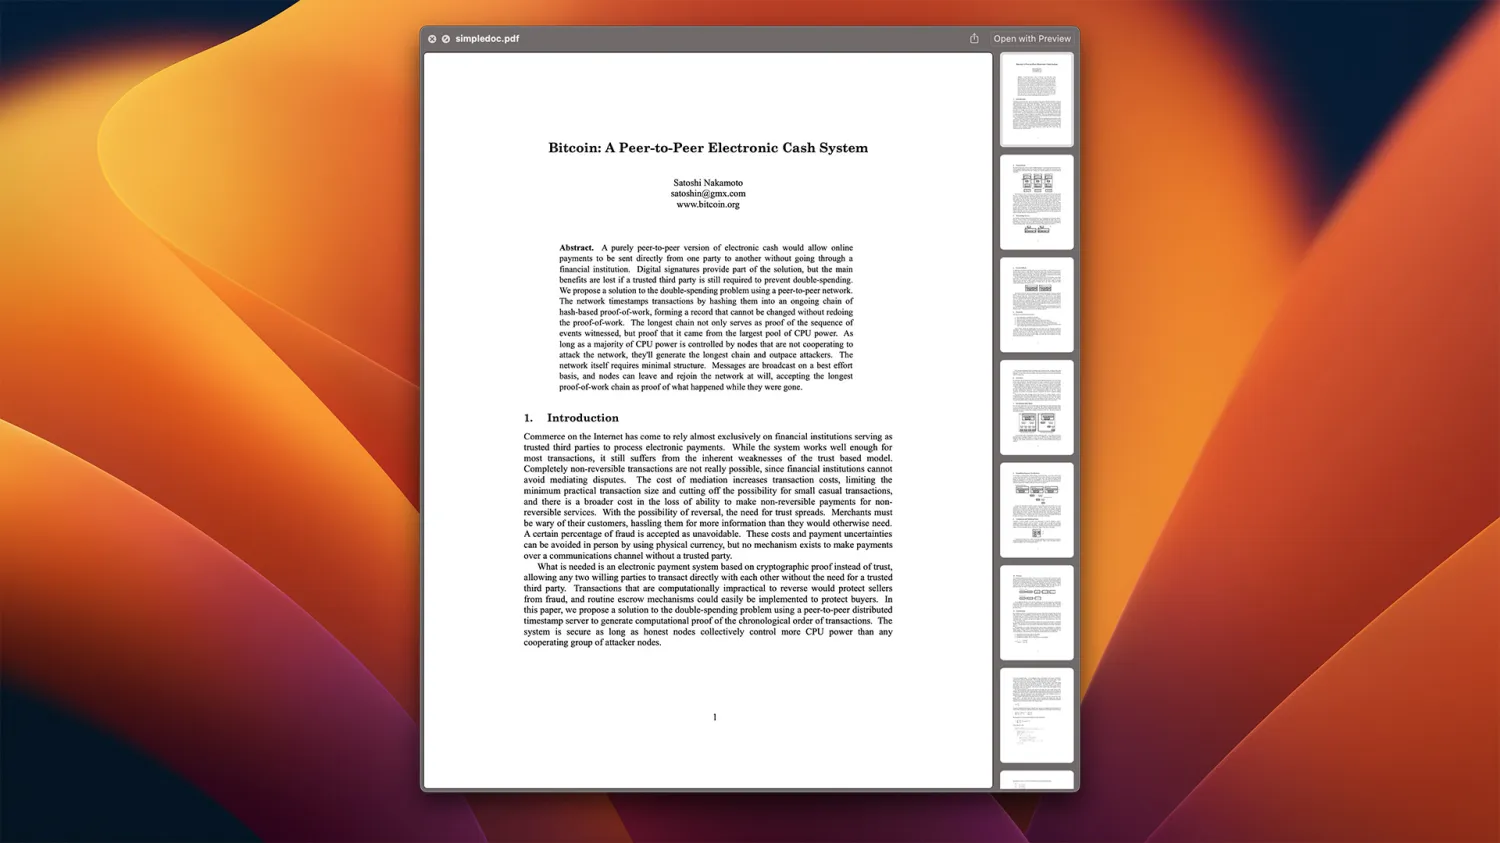 Whitepaper Bitcoin in macOS